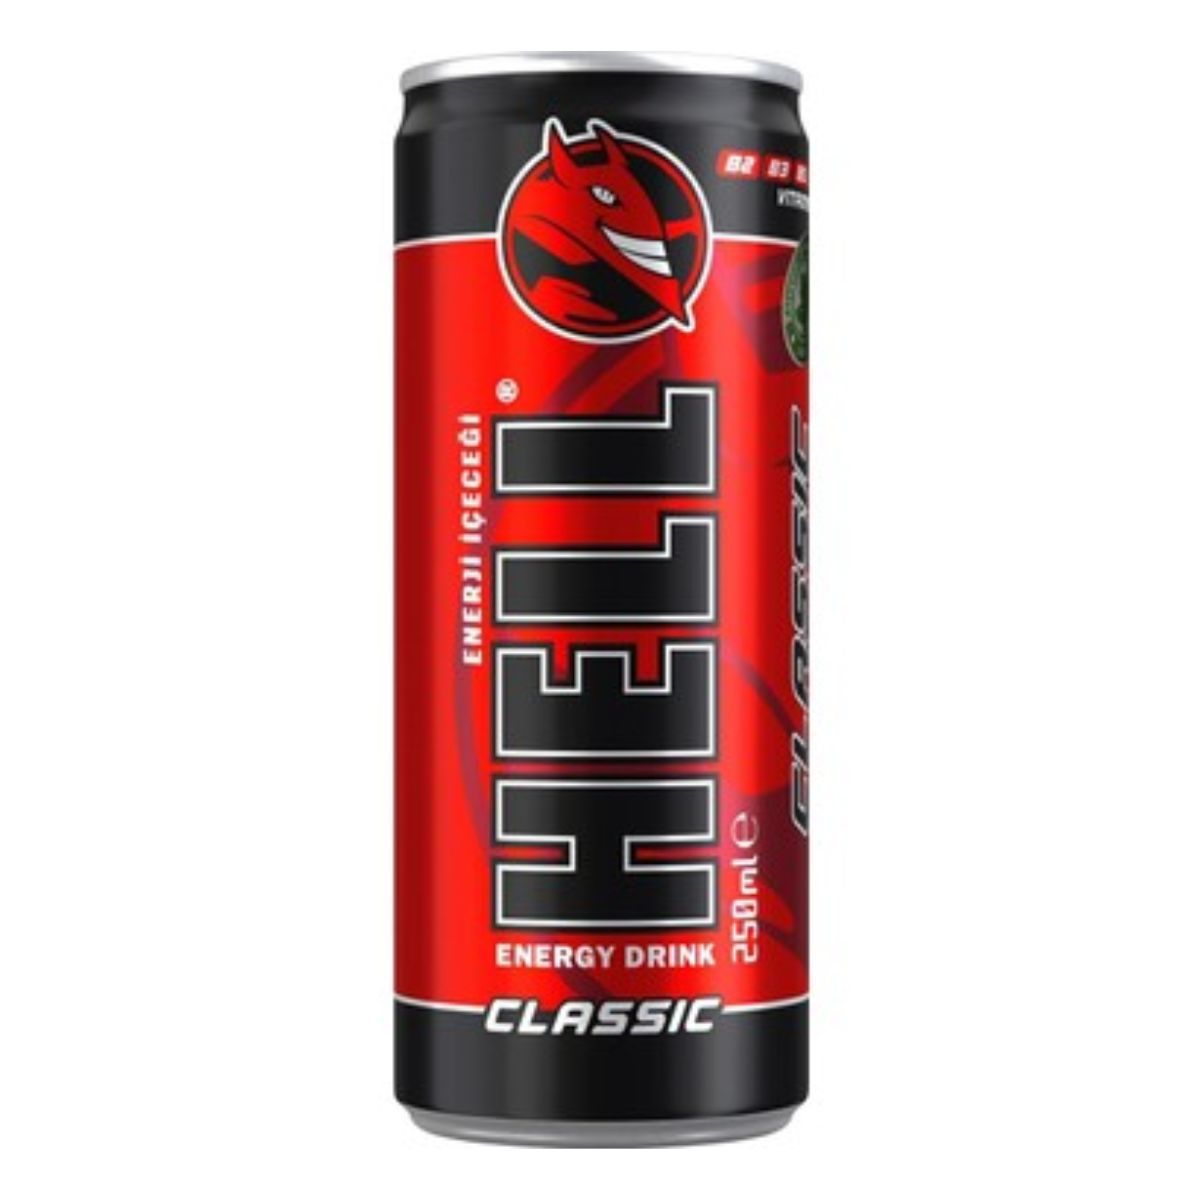 A can of Hell - Energy Drink Classic - 250ml on a white background.